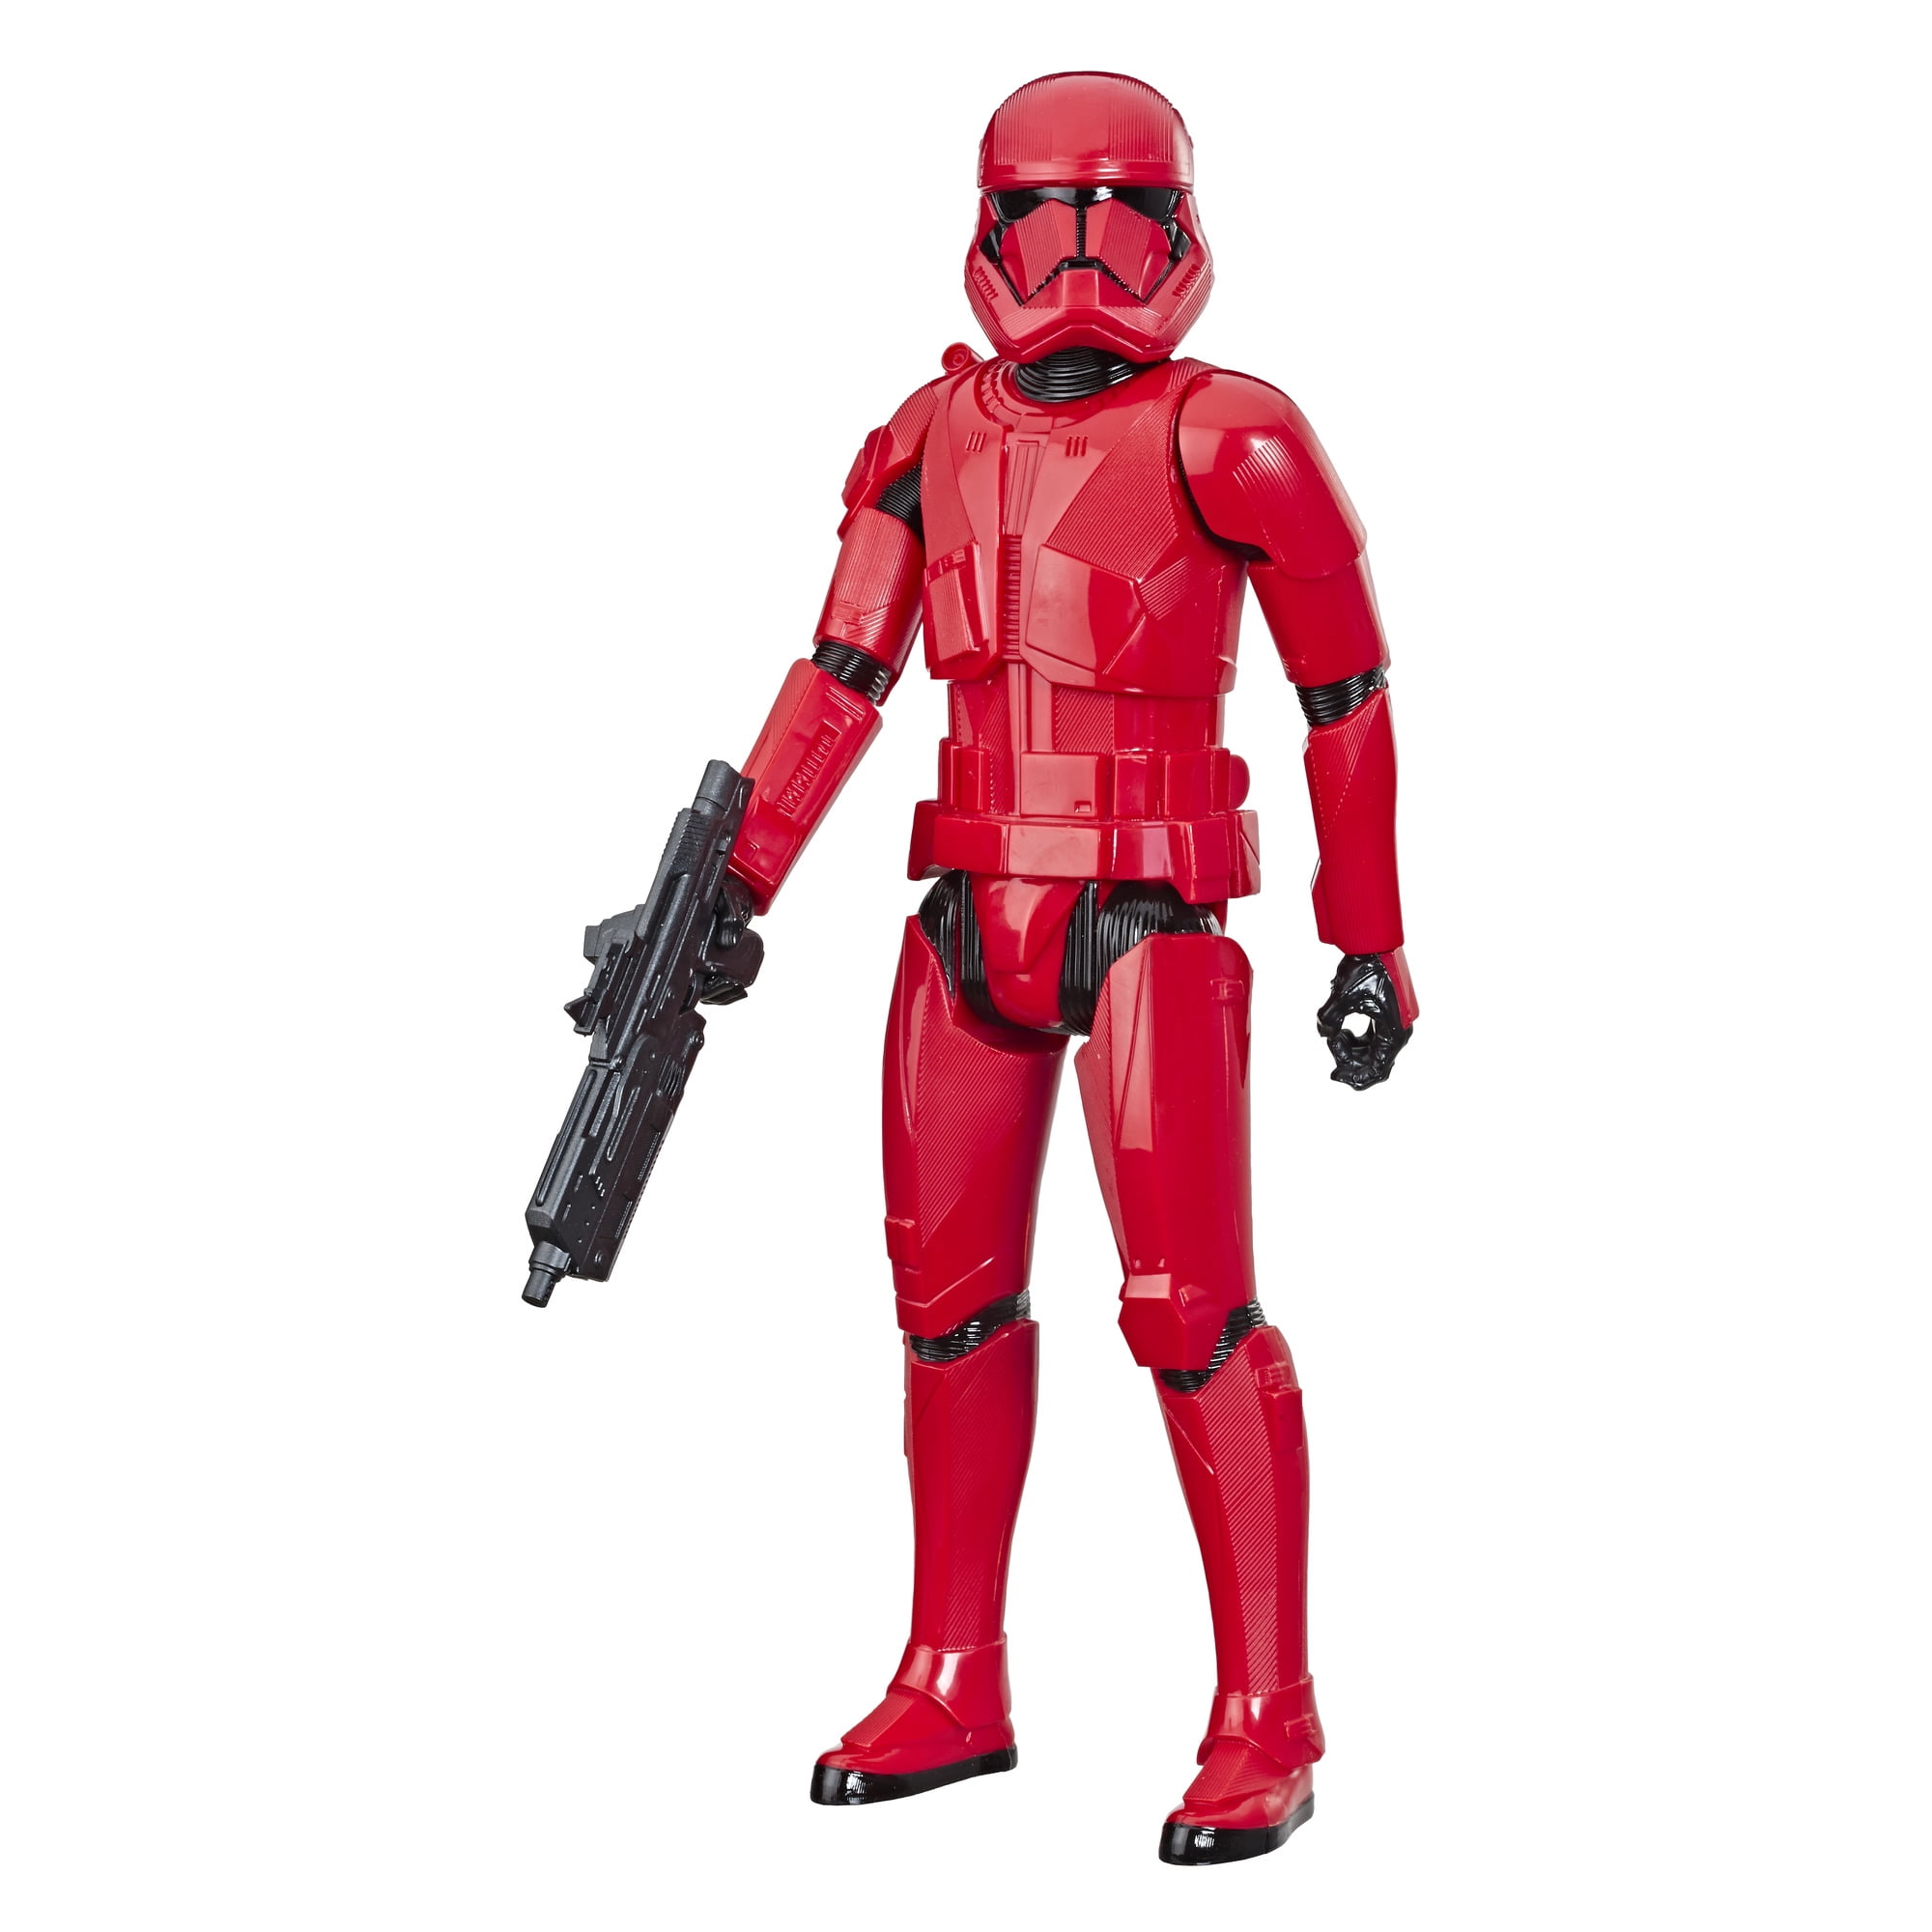 Star Wars The Rise Of Skywalker Sith Trooper And Kylo 12 Inch Action Figure 